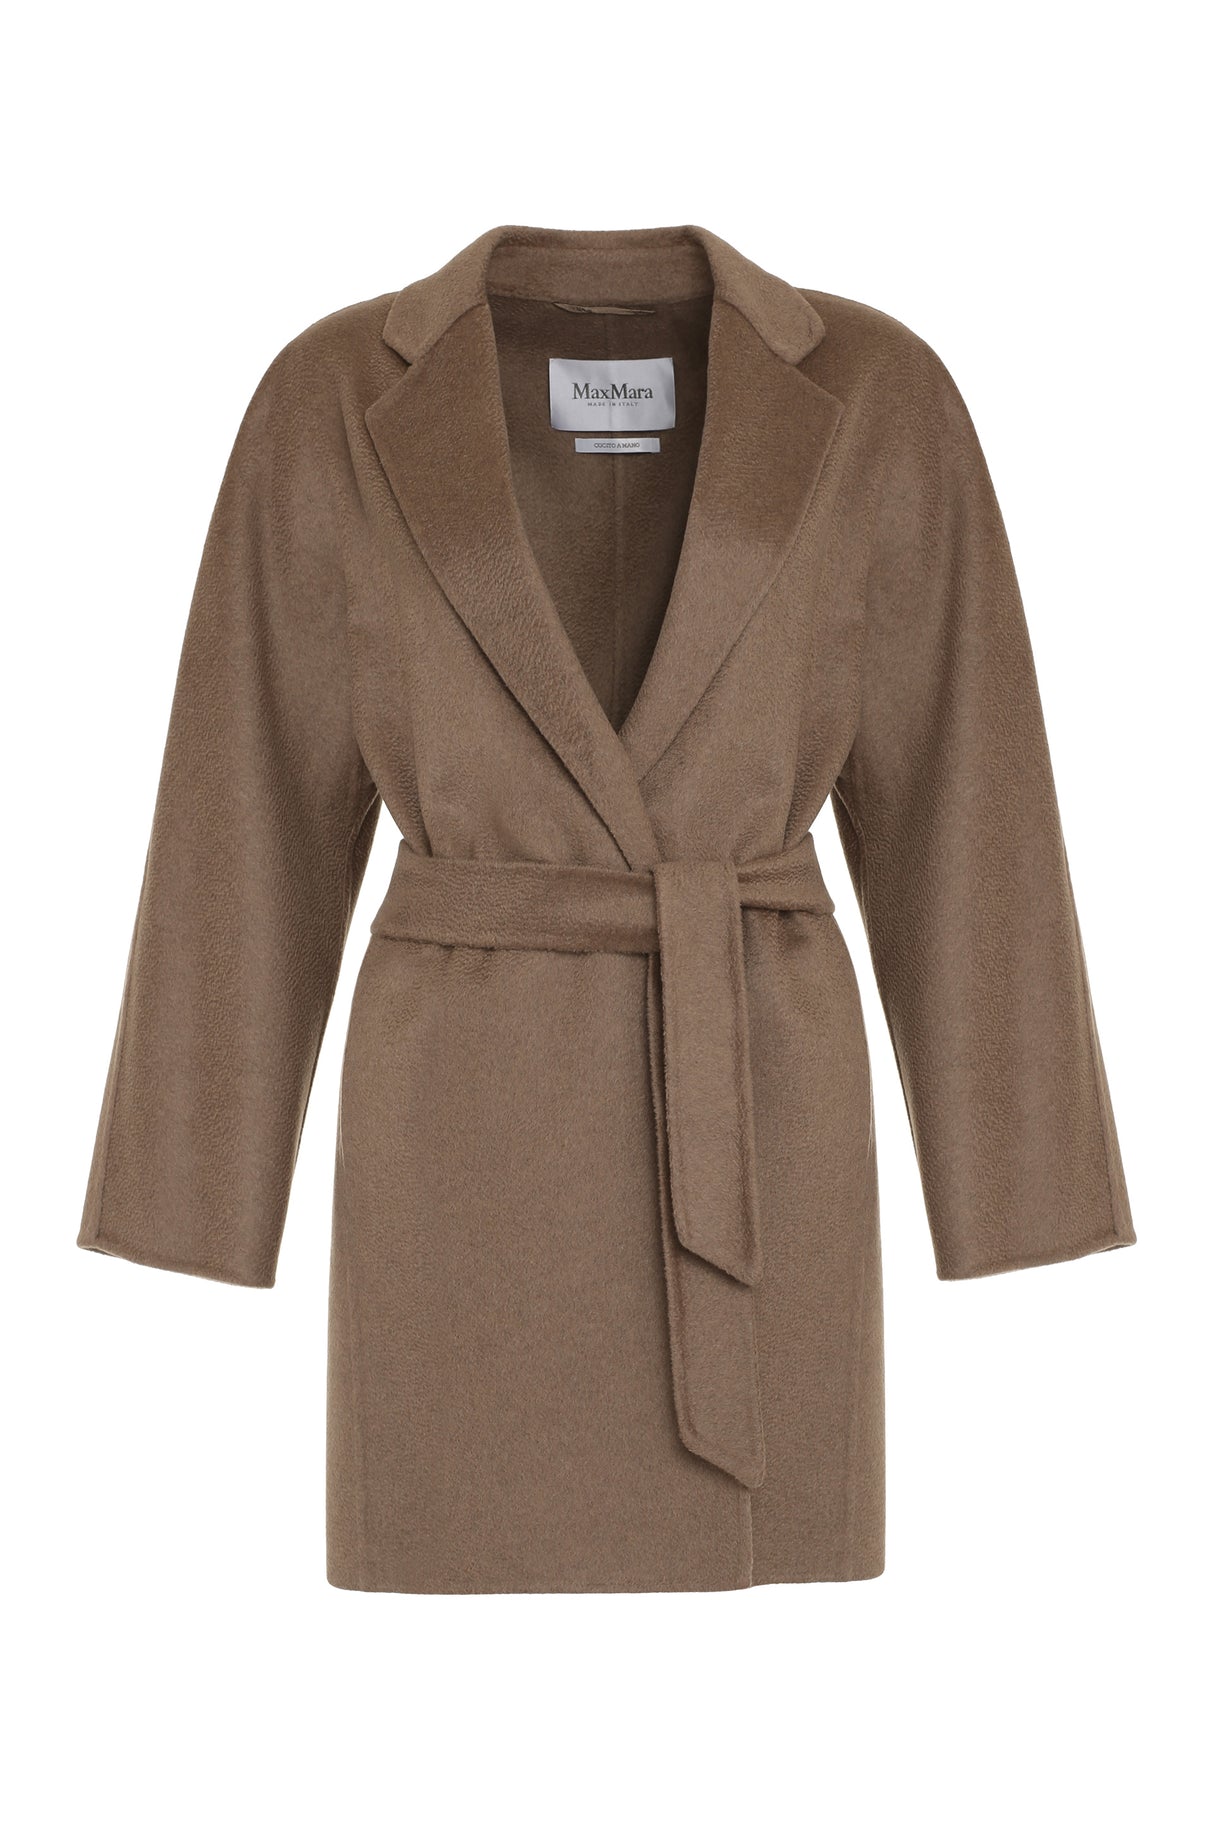 Women's Taupe Cashmere Jacket with Hand-Made Lapel Collar and Coordinated Waist Belt